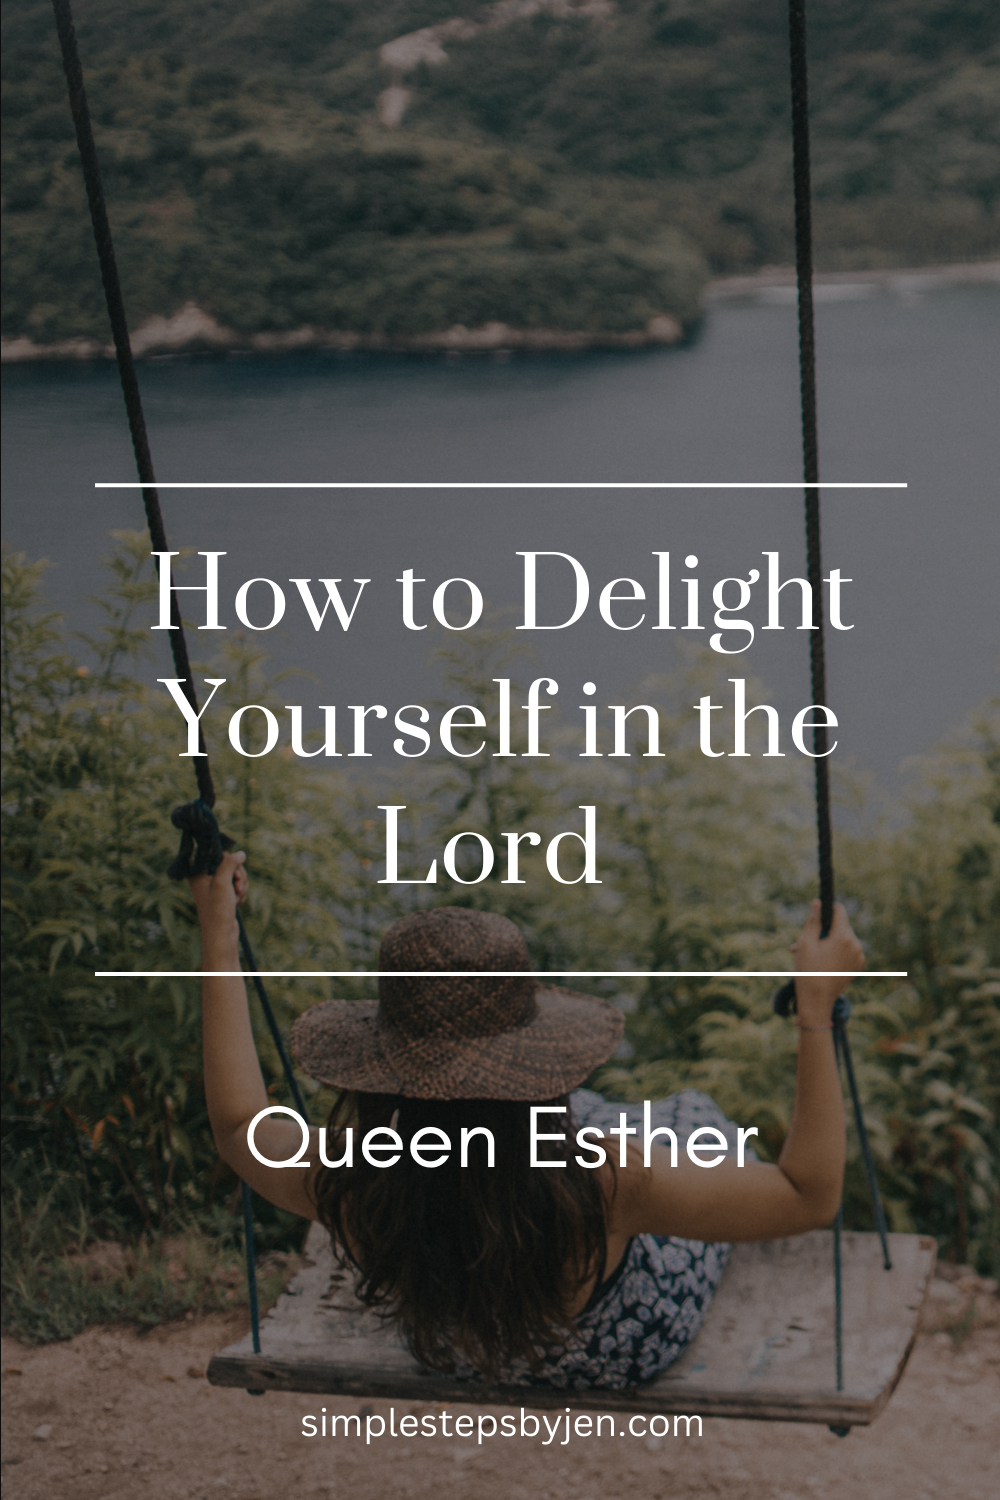 Delight yourself in the Lord